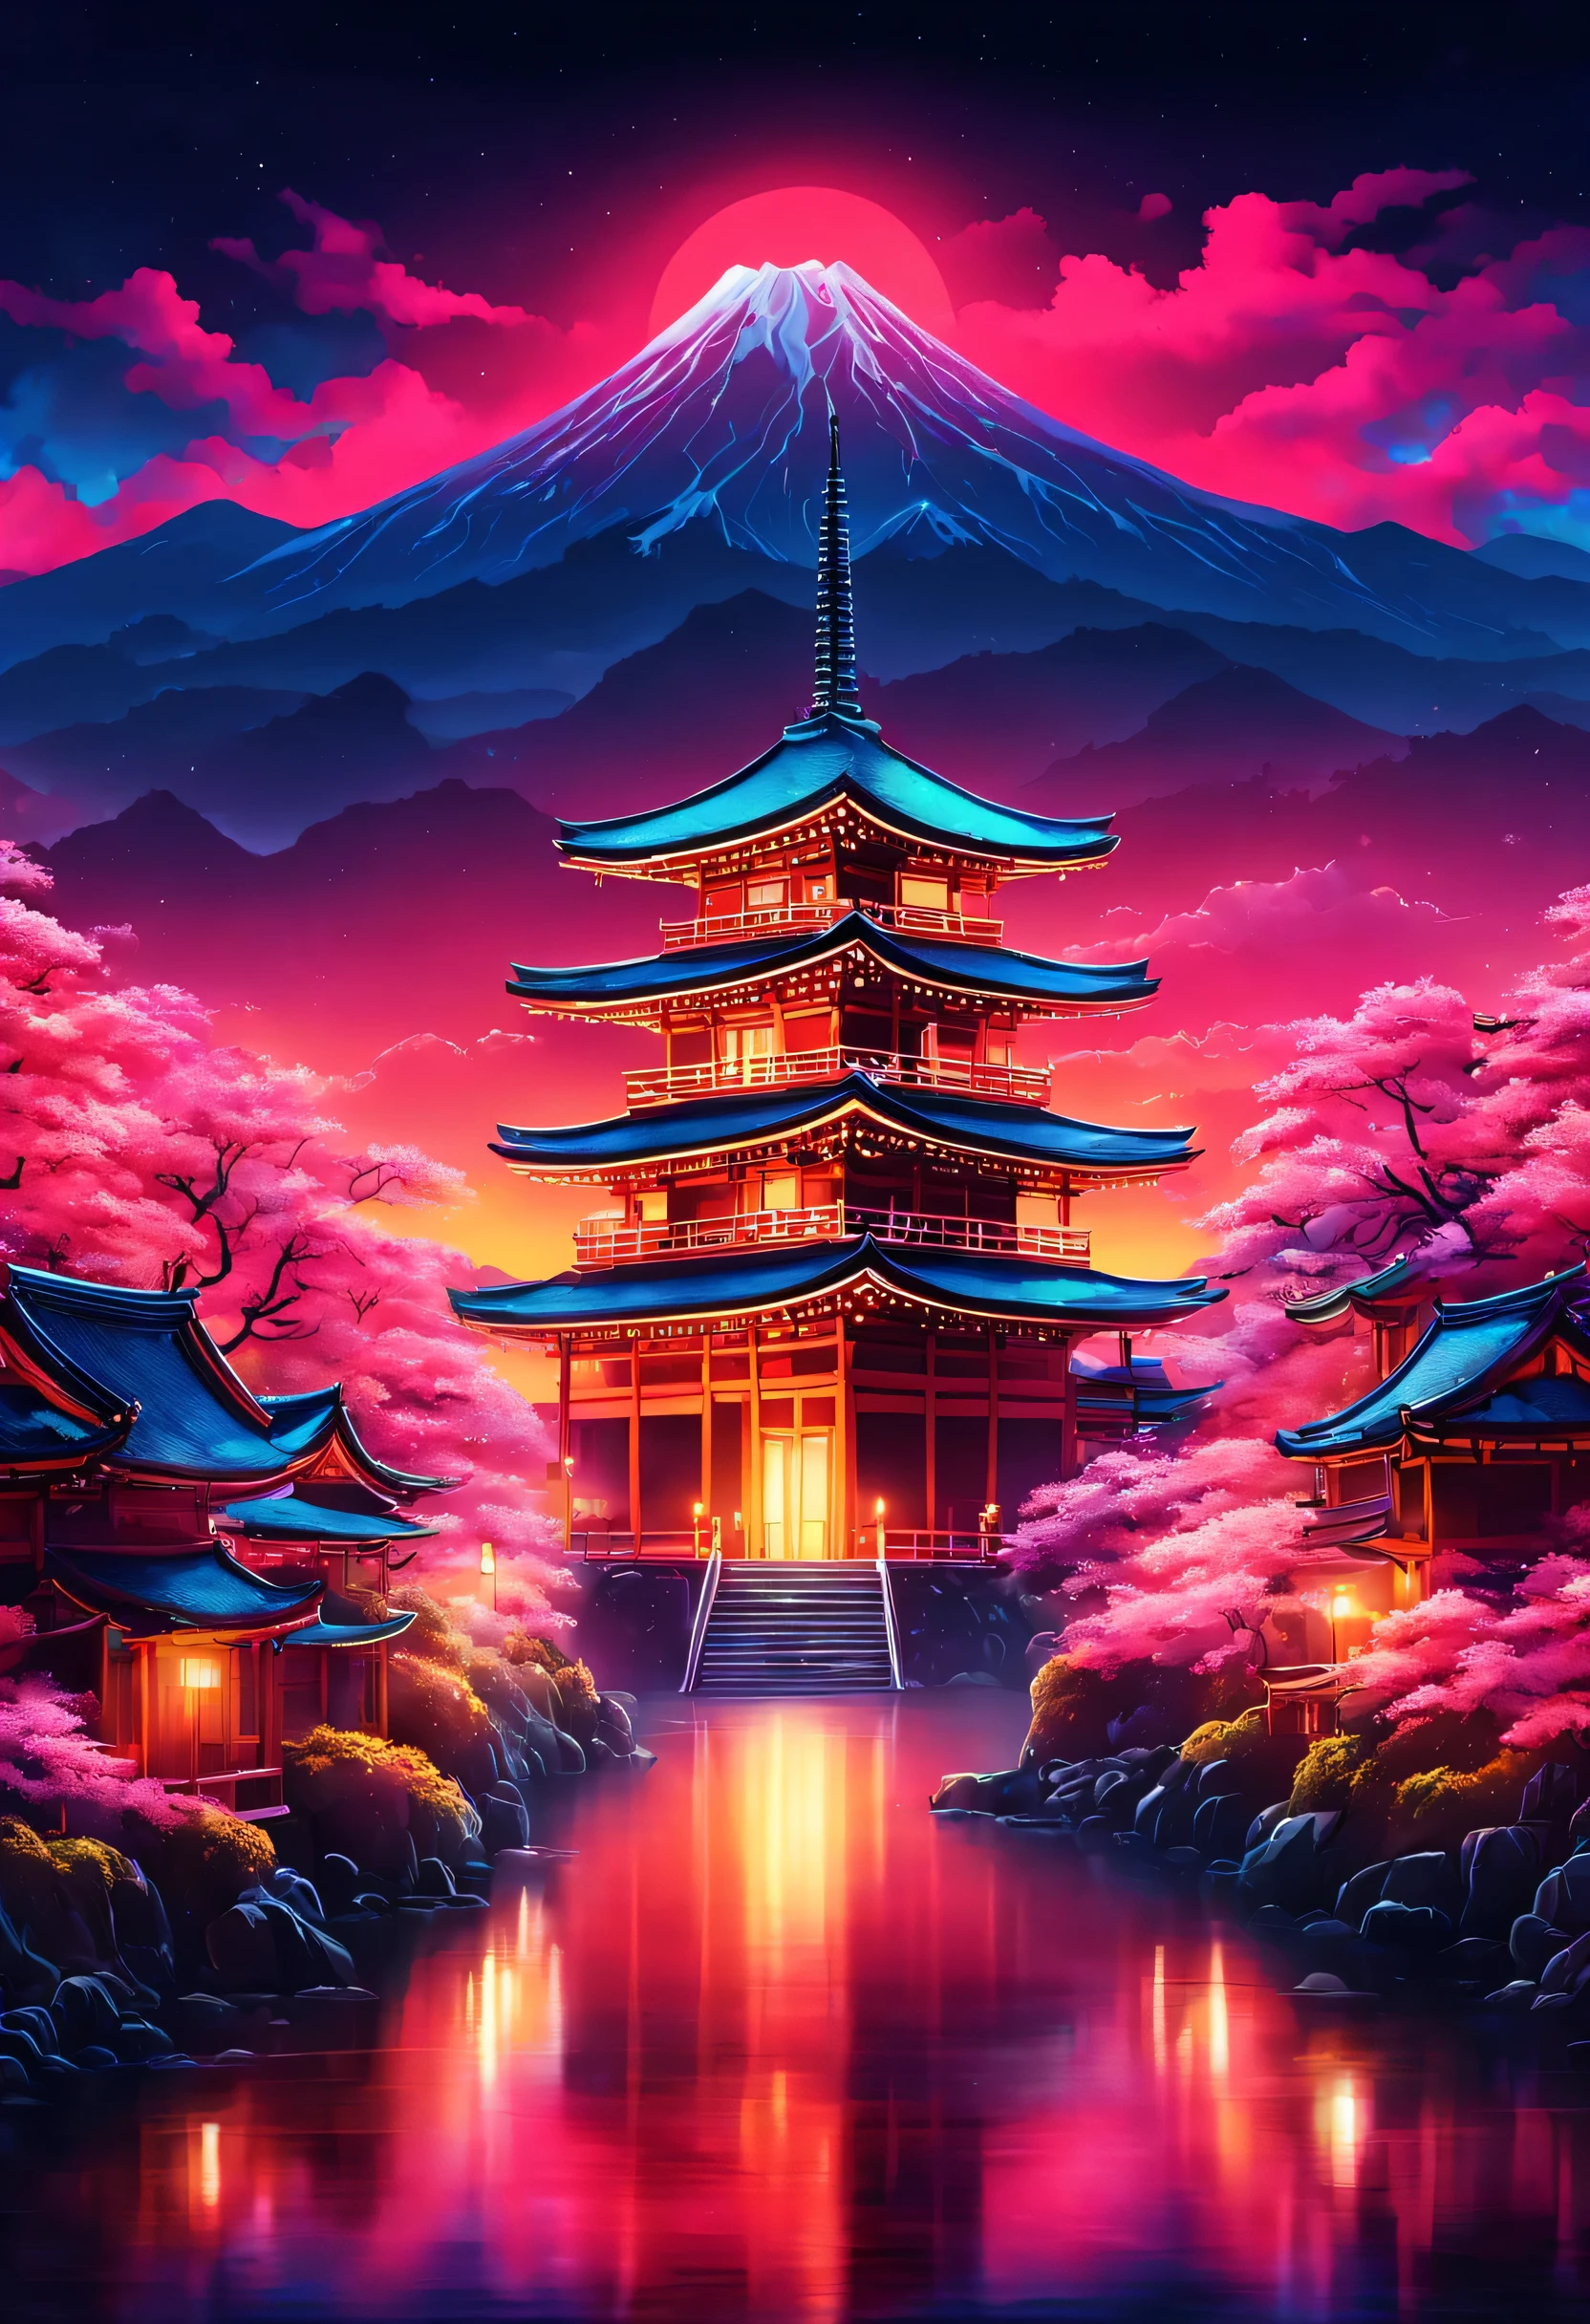 The aesthetics of Vaporwave,Landscape painting,Shrine painted in neon colors,Kyoto,Fushimi Inari,torii,two dancing demon foxes:silhouette,moon,star,cloud,aurora,beautiful,rich colors,flash,と明るいflash,Cast colorful spells,Draw in neon colors on a dark background,Fusion of good old Japanese scenery and modern art,Pop Illustration,poster,perfect composition,Design that expresses Japan,zentangle,magic elements,wonderful,masterpiece,4K,works of art,Bright colors,black,pink,Light blue,purple